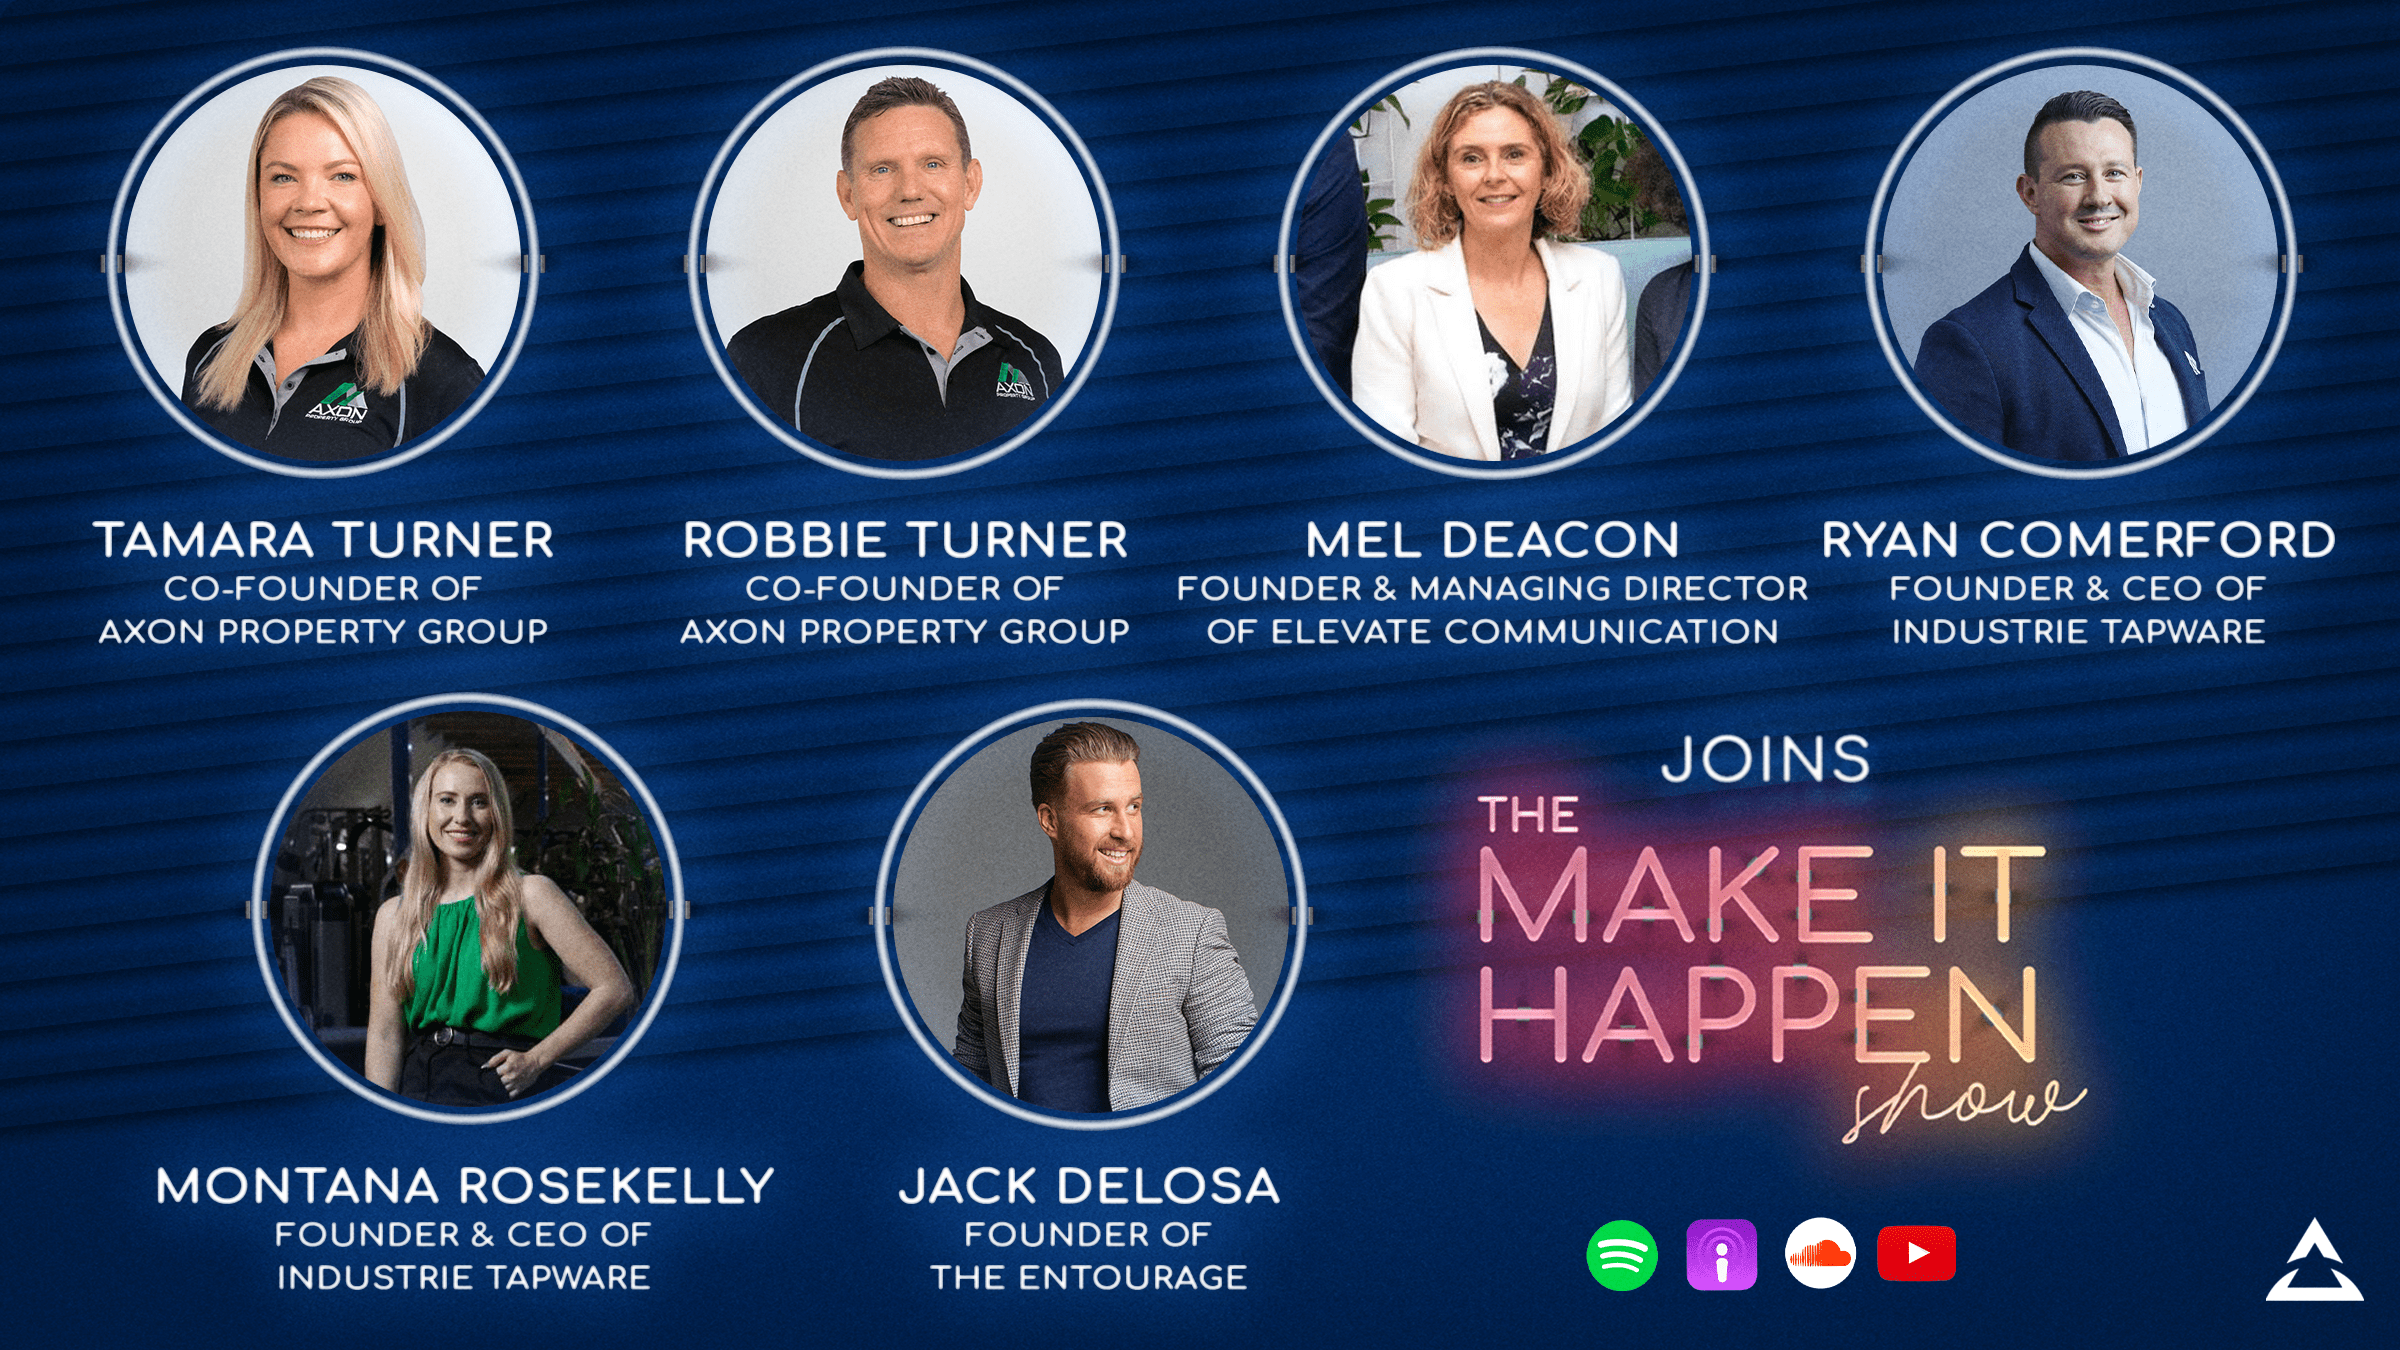 Tamara Turner and Robbie Turner (Axon Property Group), Mel Deacon (Elevate Communications), Ryan Comerford (Industrie Tapware), Montana Rosekelly (Planet Fitness), Jack Delosa (The Entourage)